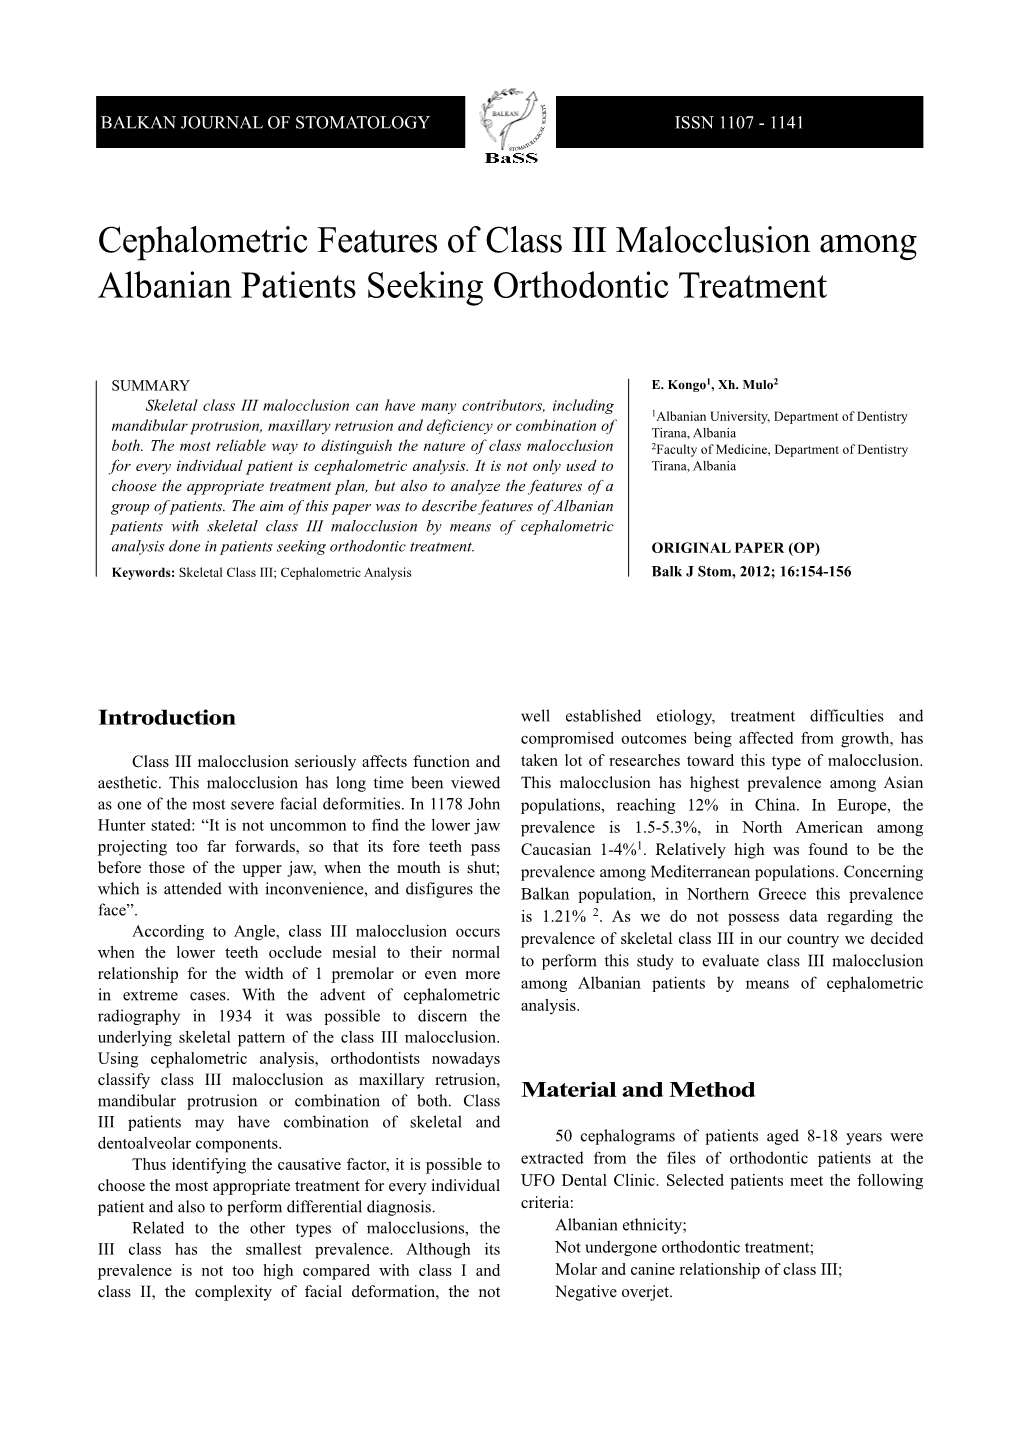 Cephalometric Features of Class III Malocclusion Among Albanian Patients Seeking Orthodontic Treatment